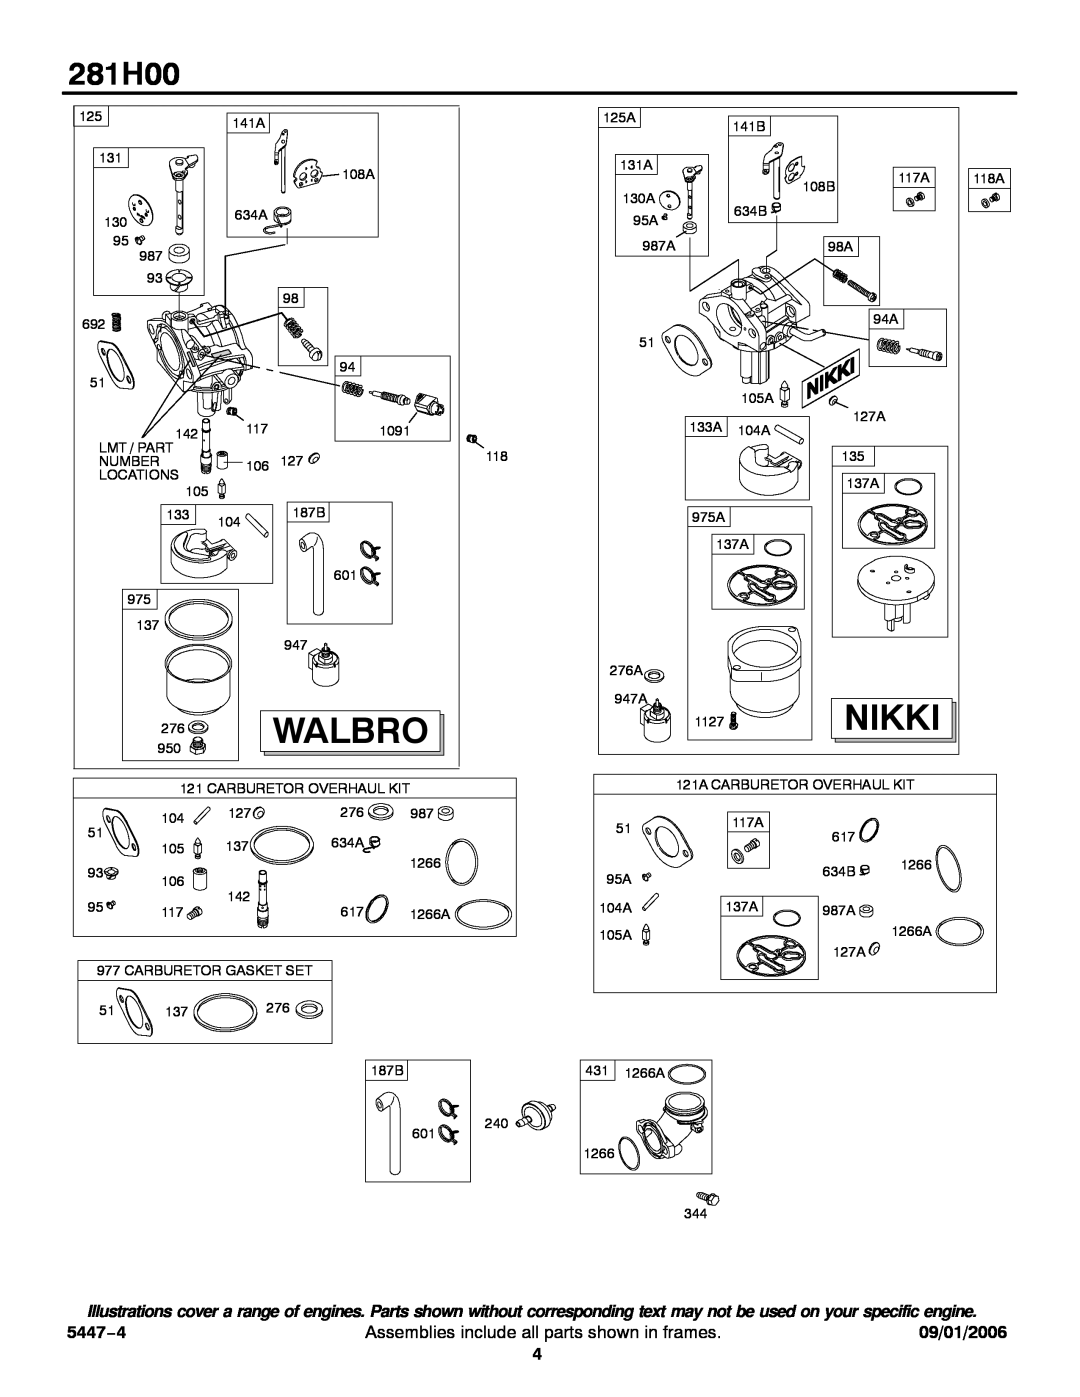 Briggs & Stratton 281H00 service manual Nikki, 5447−4, Walbro, Assemblies include all parts shown in frames, 09/01/2006 